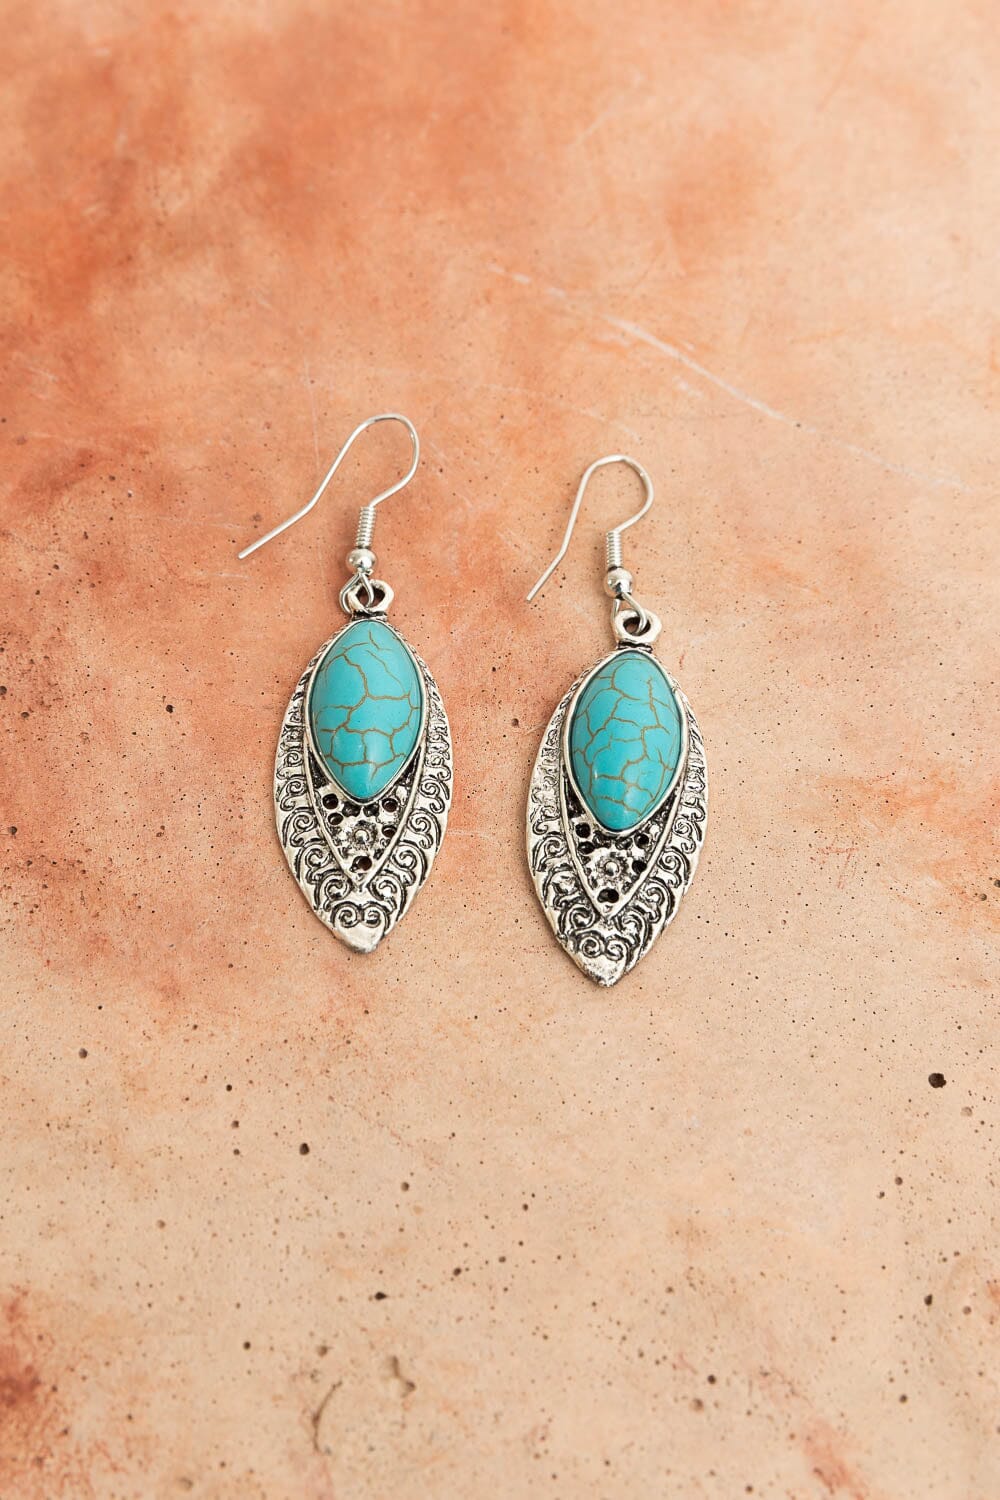 Vintage Engraved Turquoise Earrings Jewelry Leto Collection Silver 